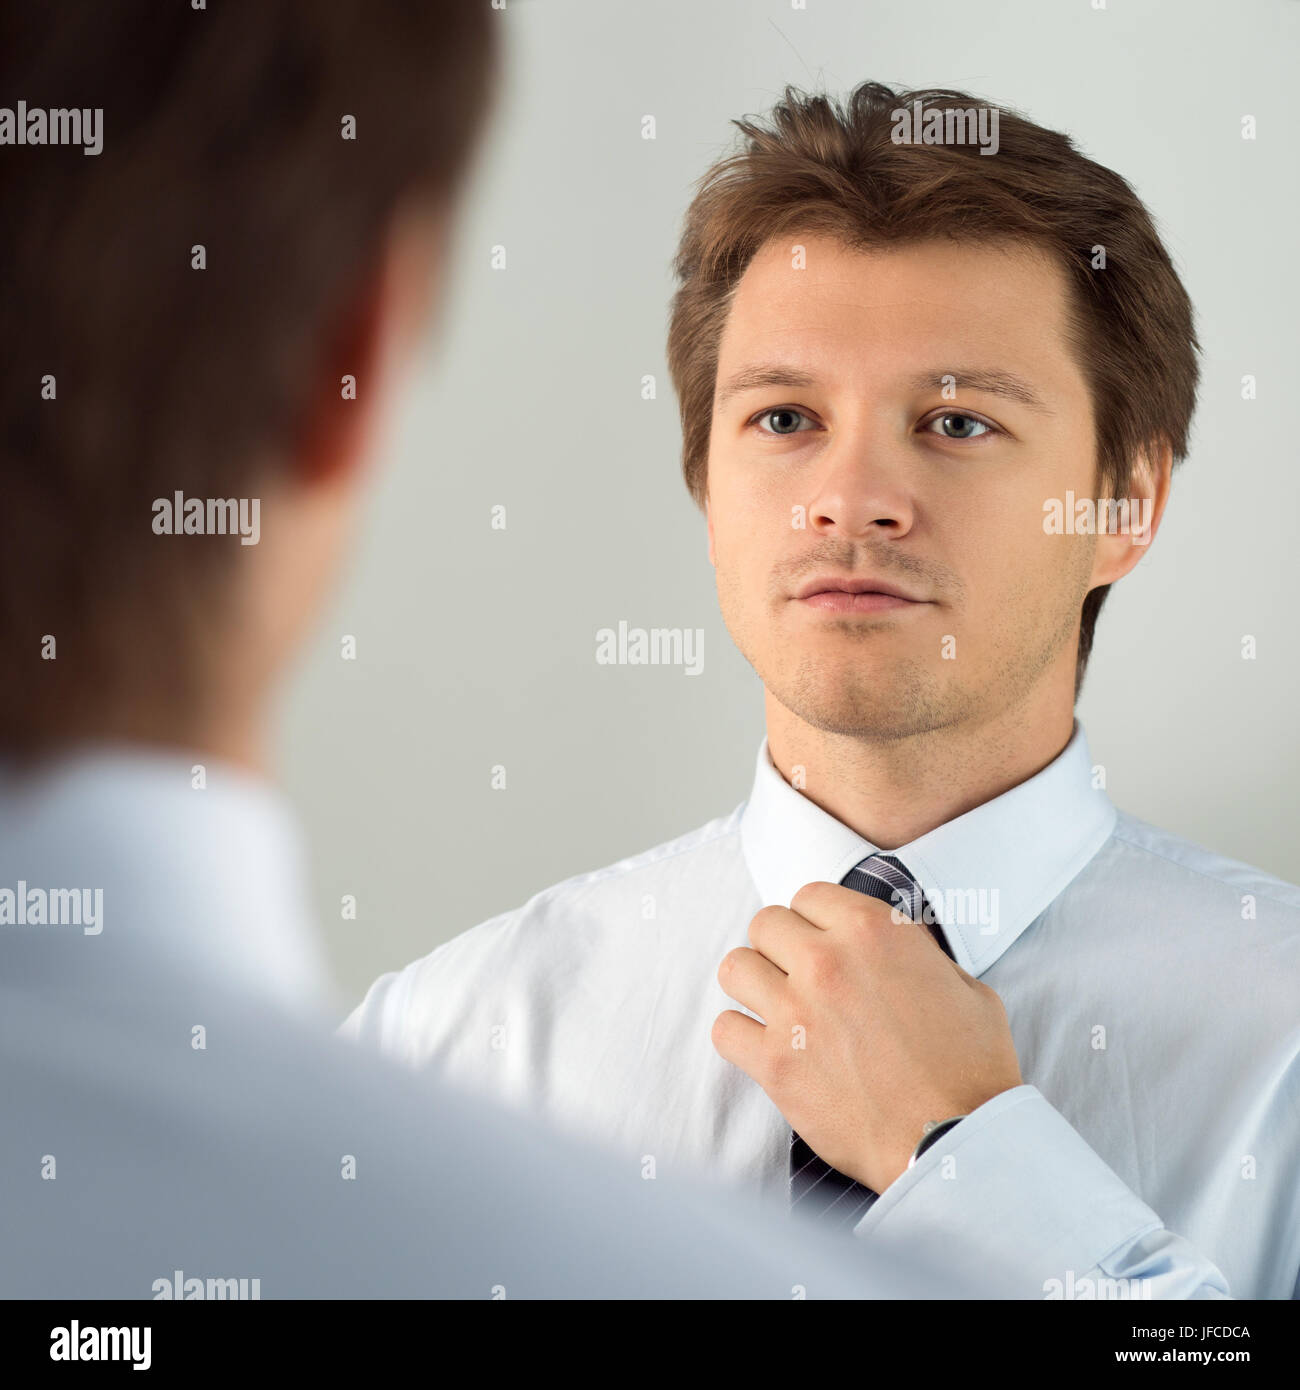 Handsome businessman preparing to official event, straighten tie. New job interview, self motivation for confidence, trying fashionable necktie knot,  Stock Photo